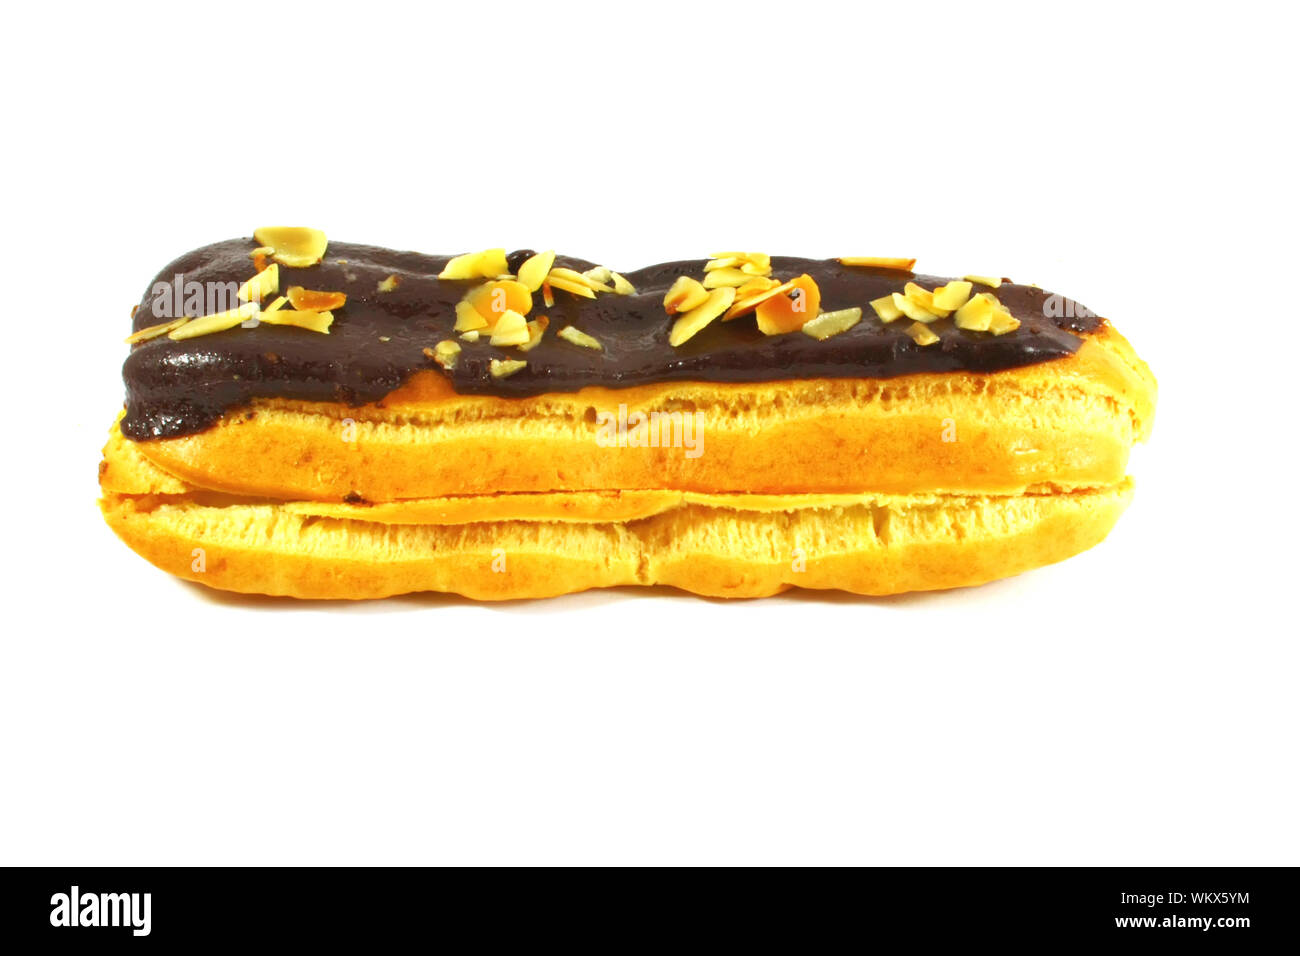 Eclair With Cream Filling Isolated on a White Background Stock Photo